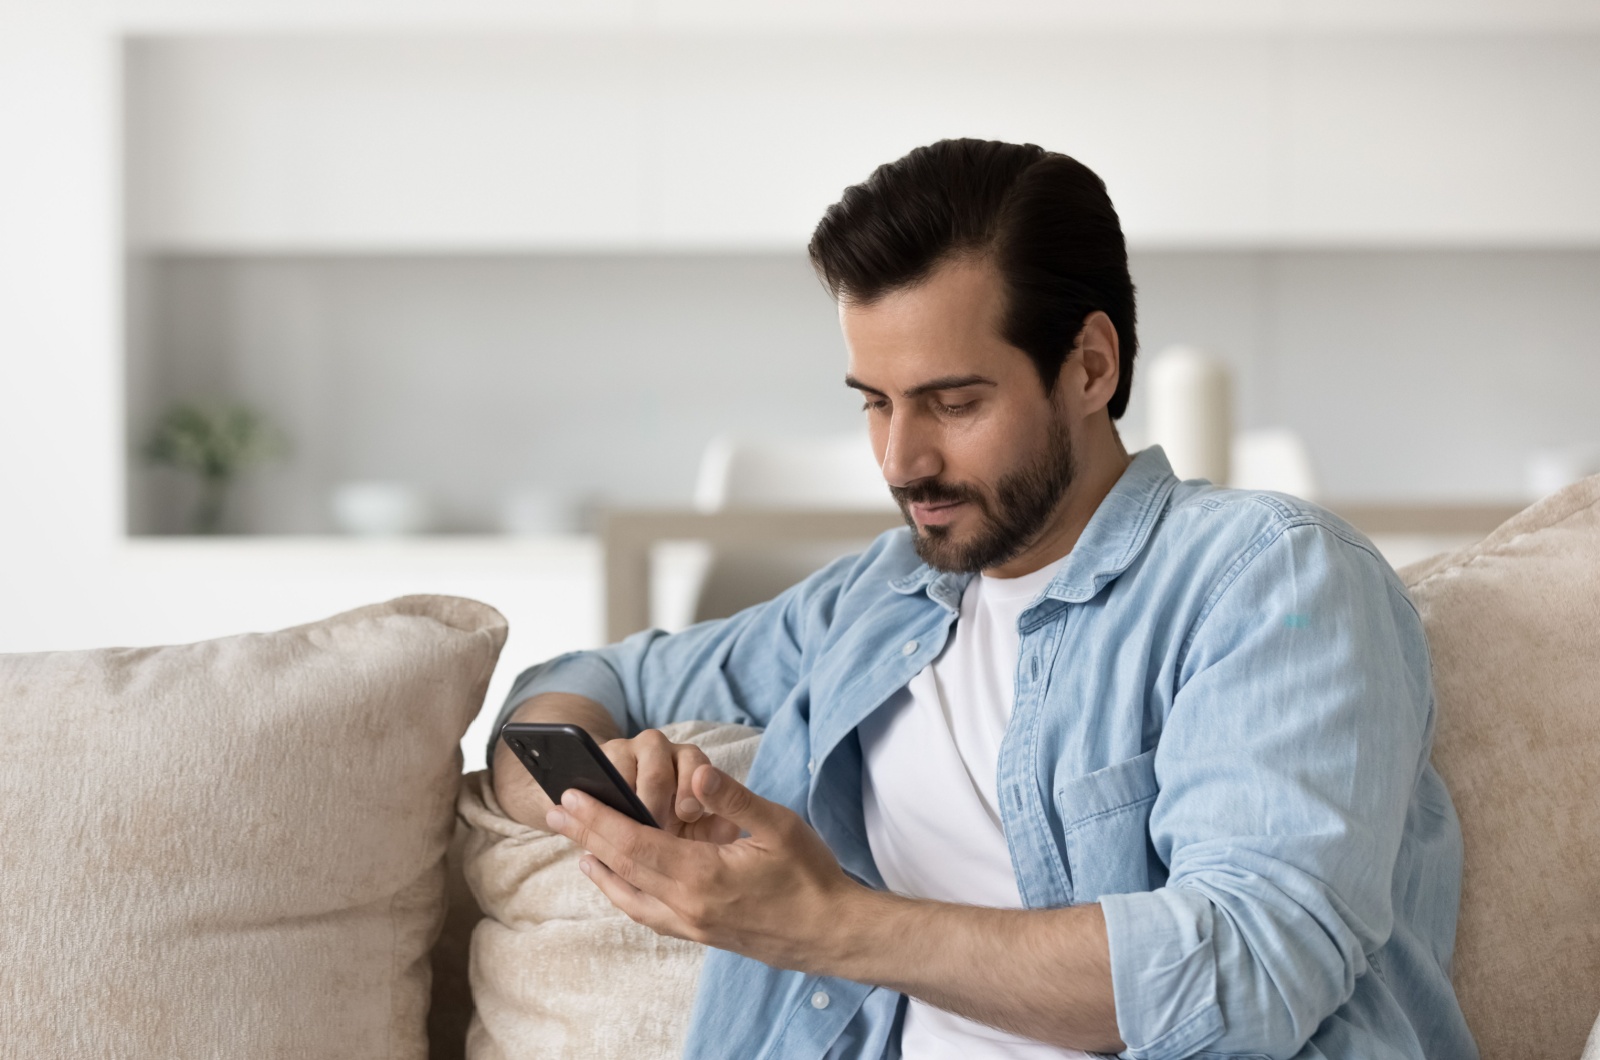 man sitting on couch texting